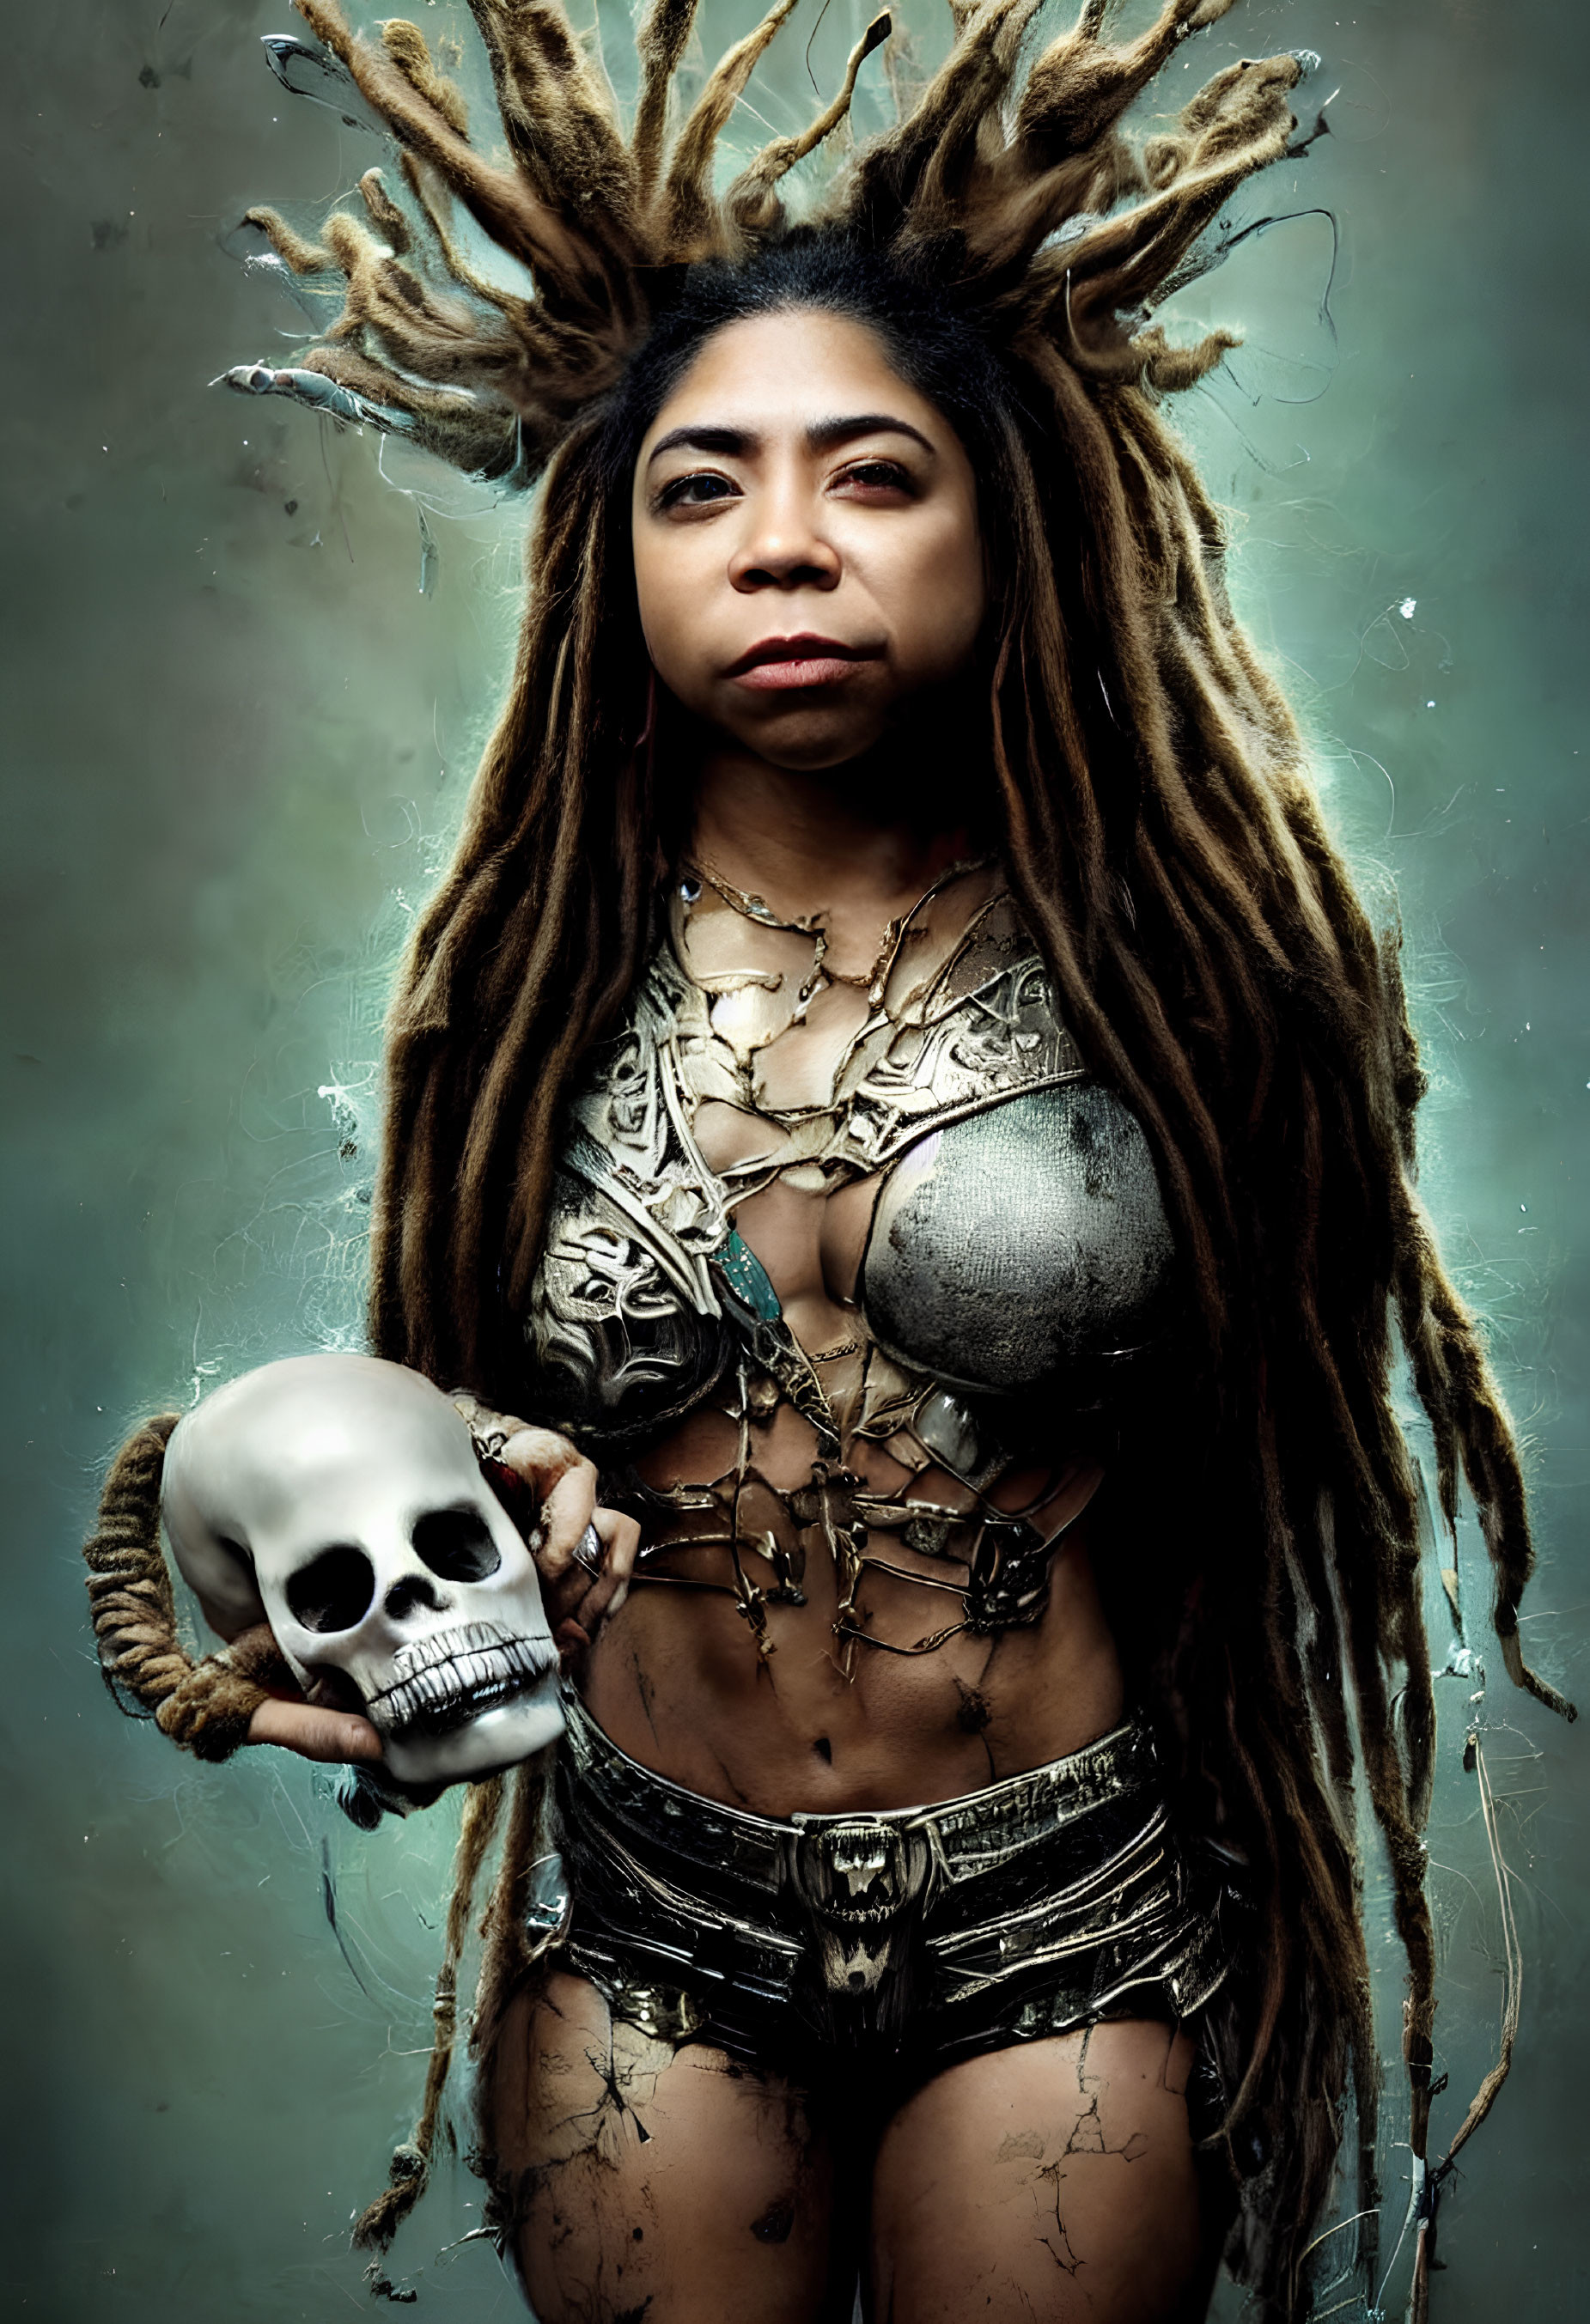 Person with dreadlocks in skull-themed fantasy costume holding a skull on textured backdrop